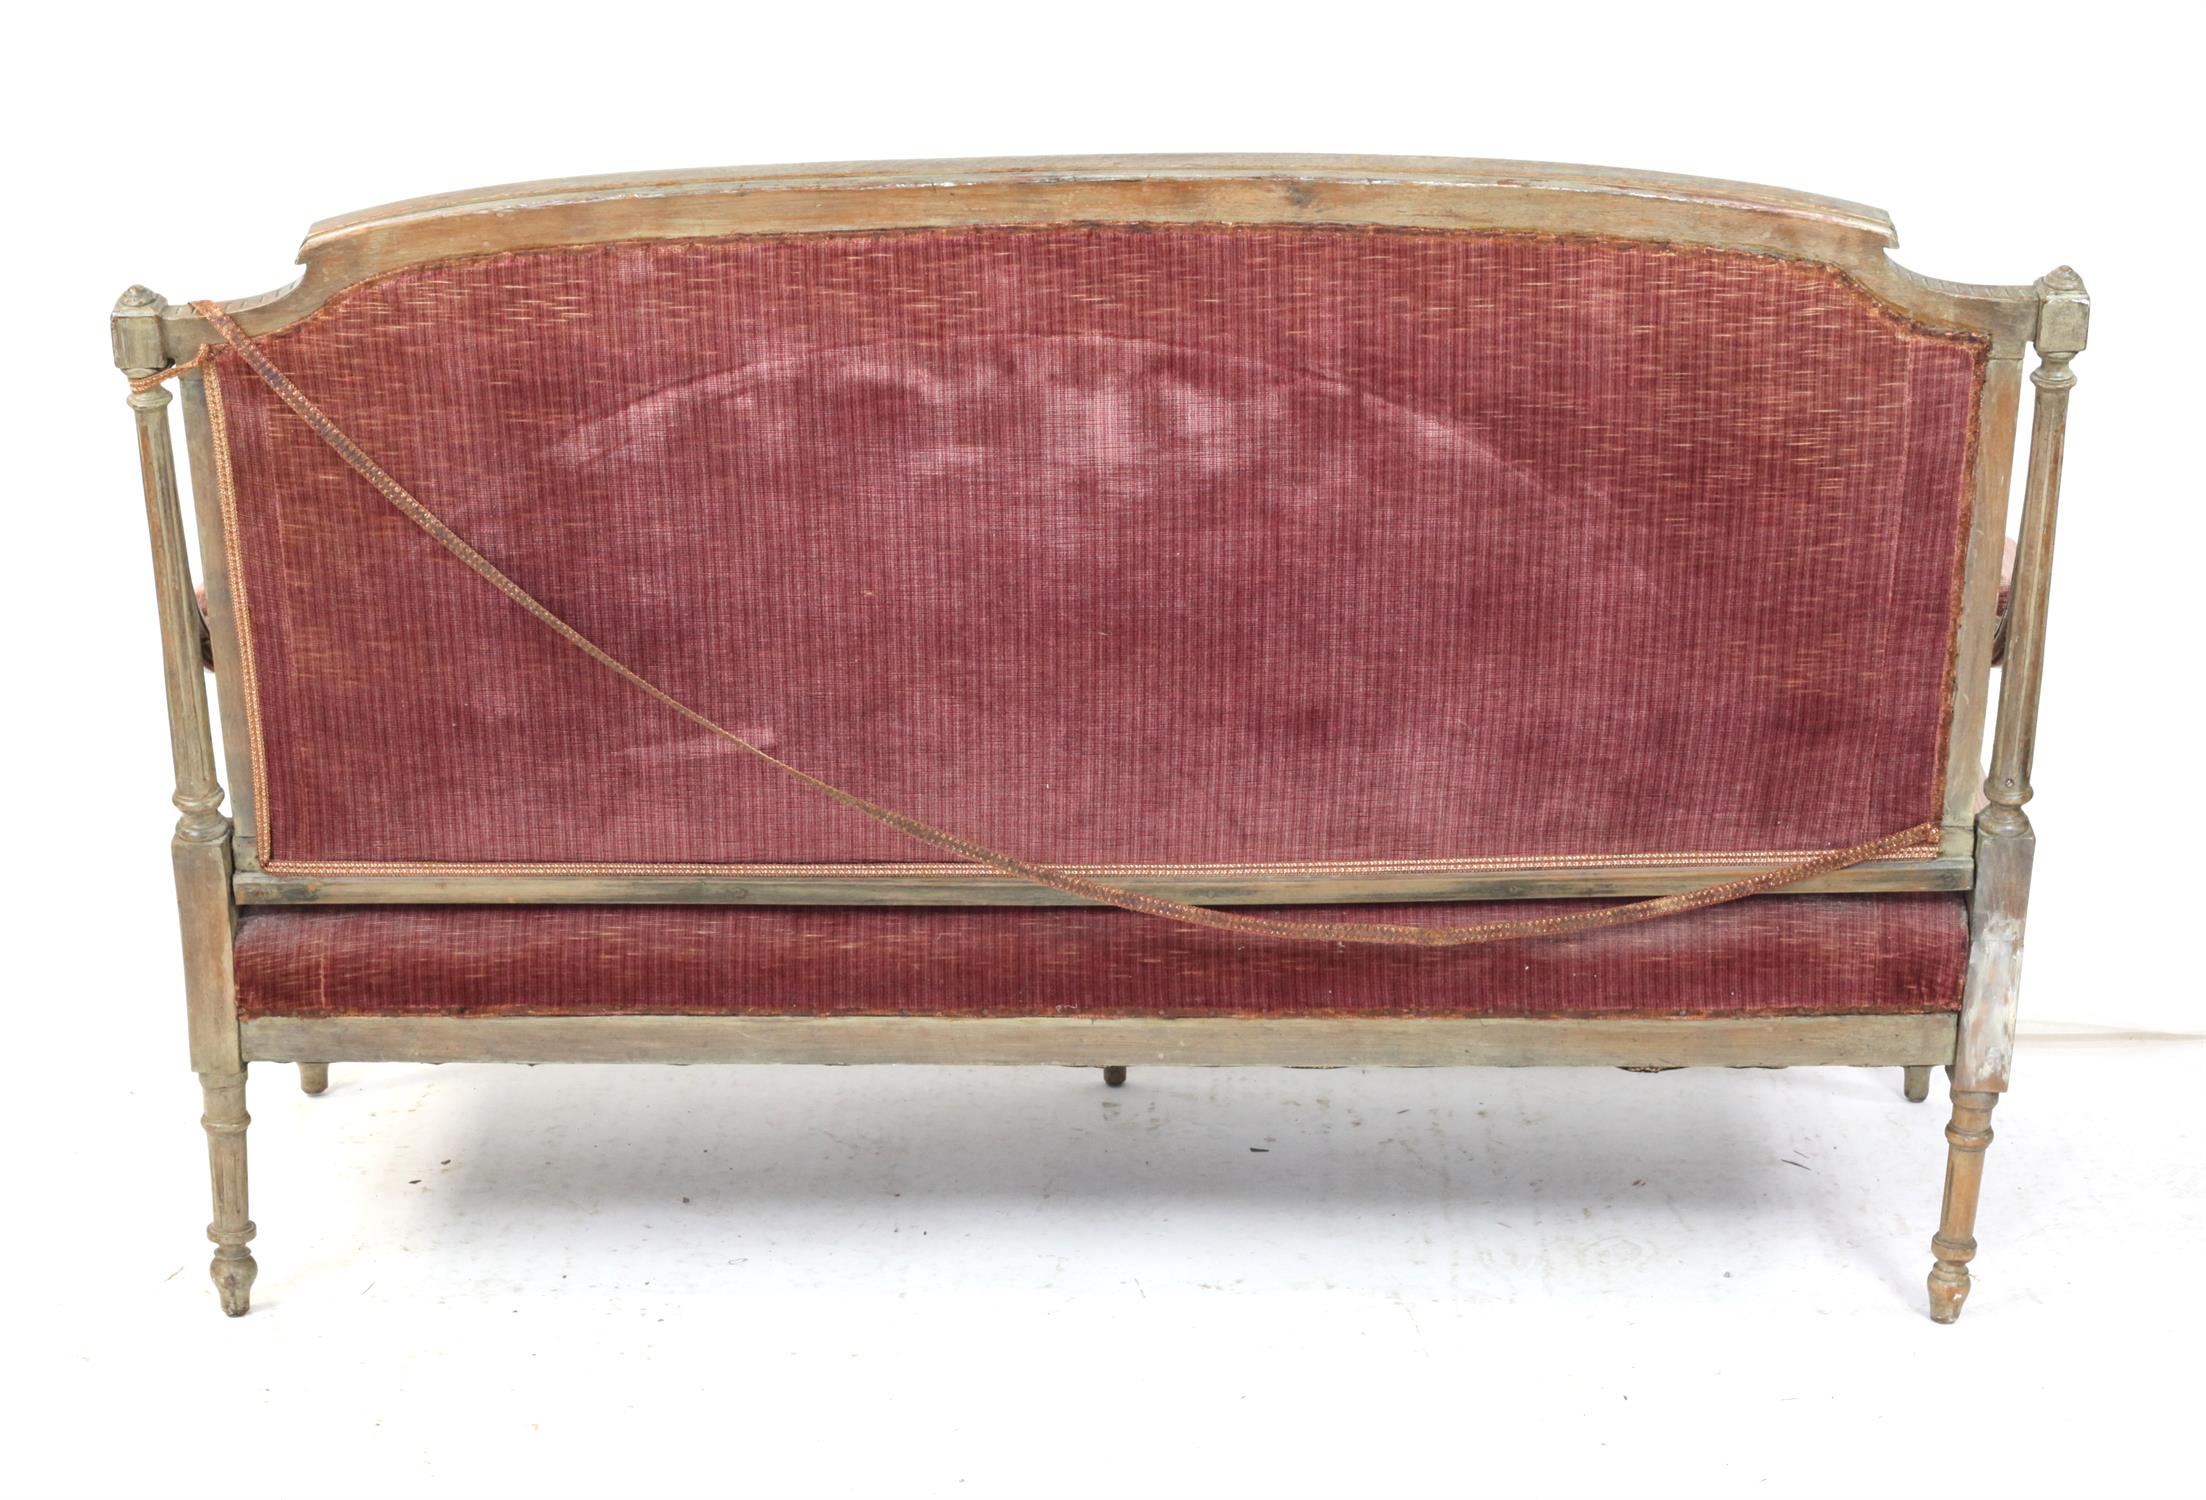 19th century French painted sofa, with carved decoration on turned and reeded legs, - Image 3 of 3